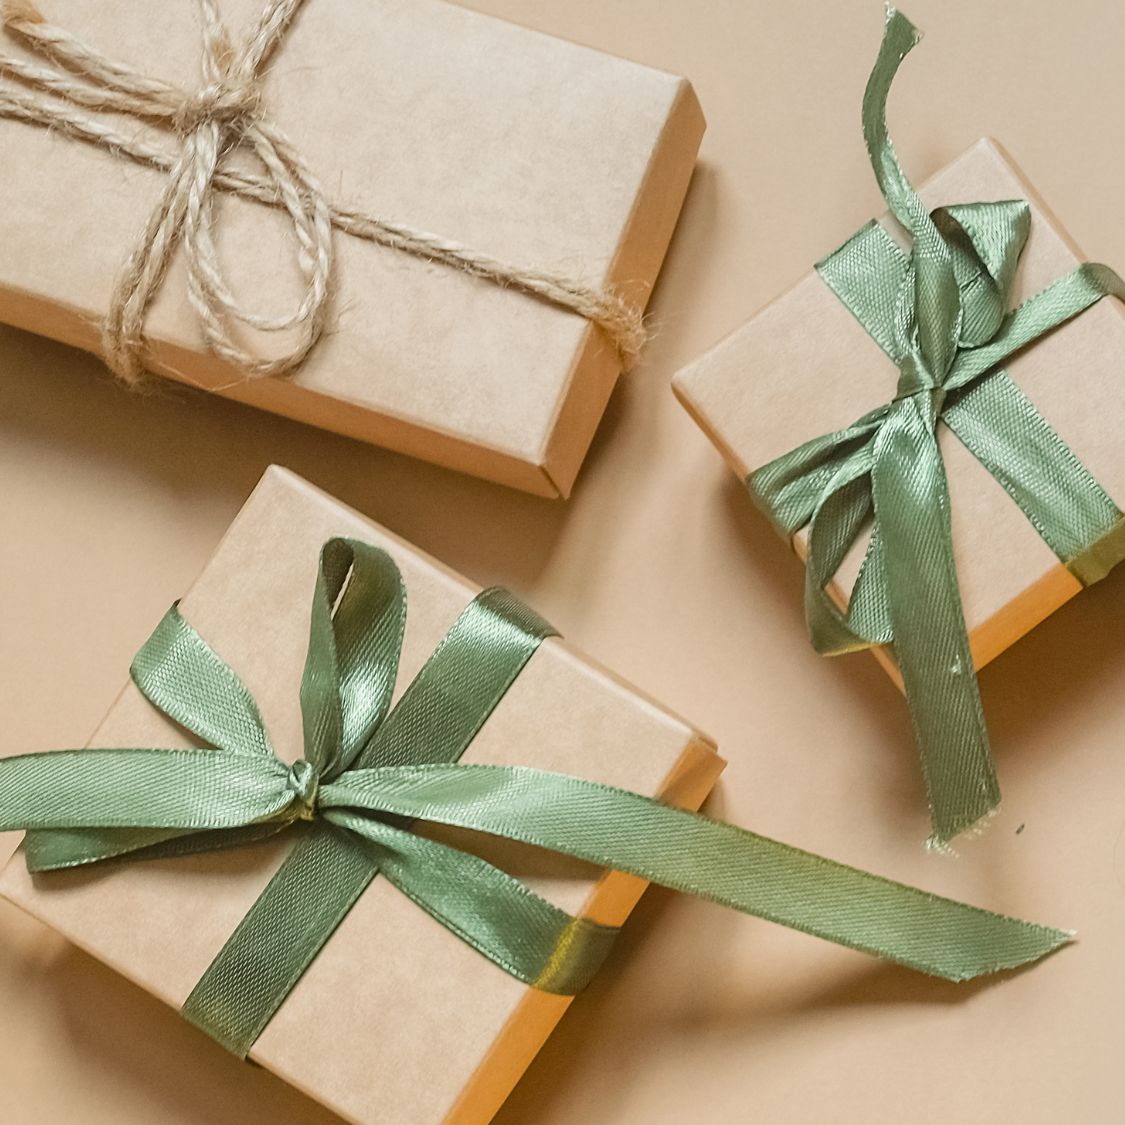 What To Do When You Don’t Know How To Buy Gifts